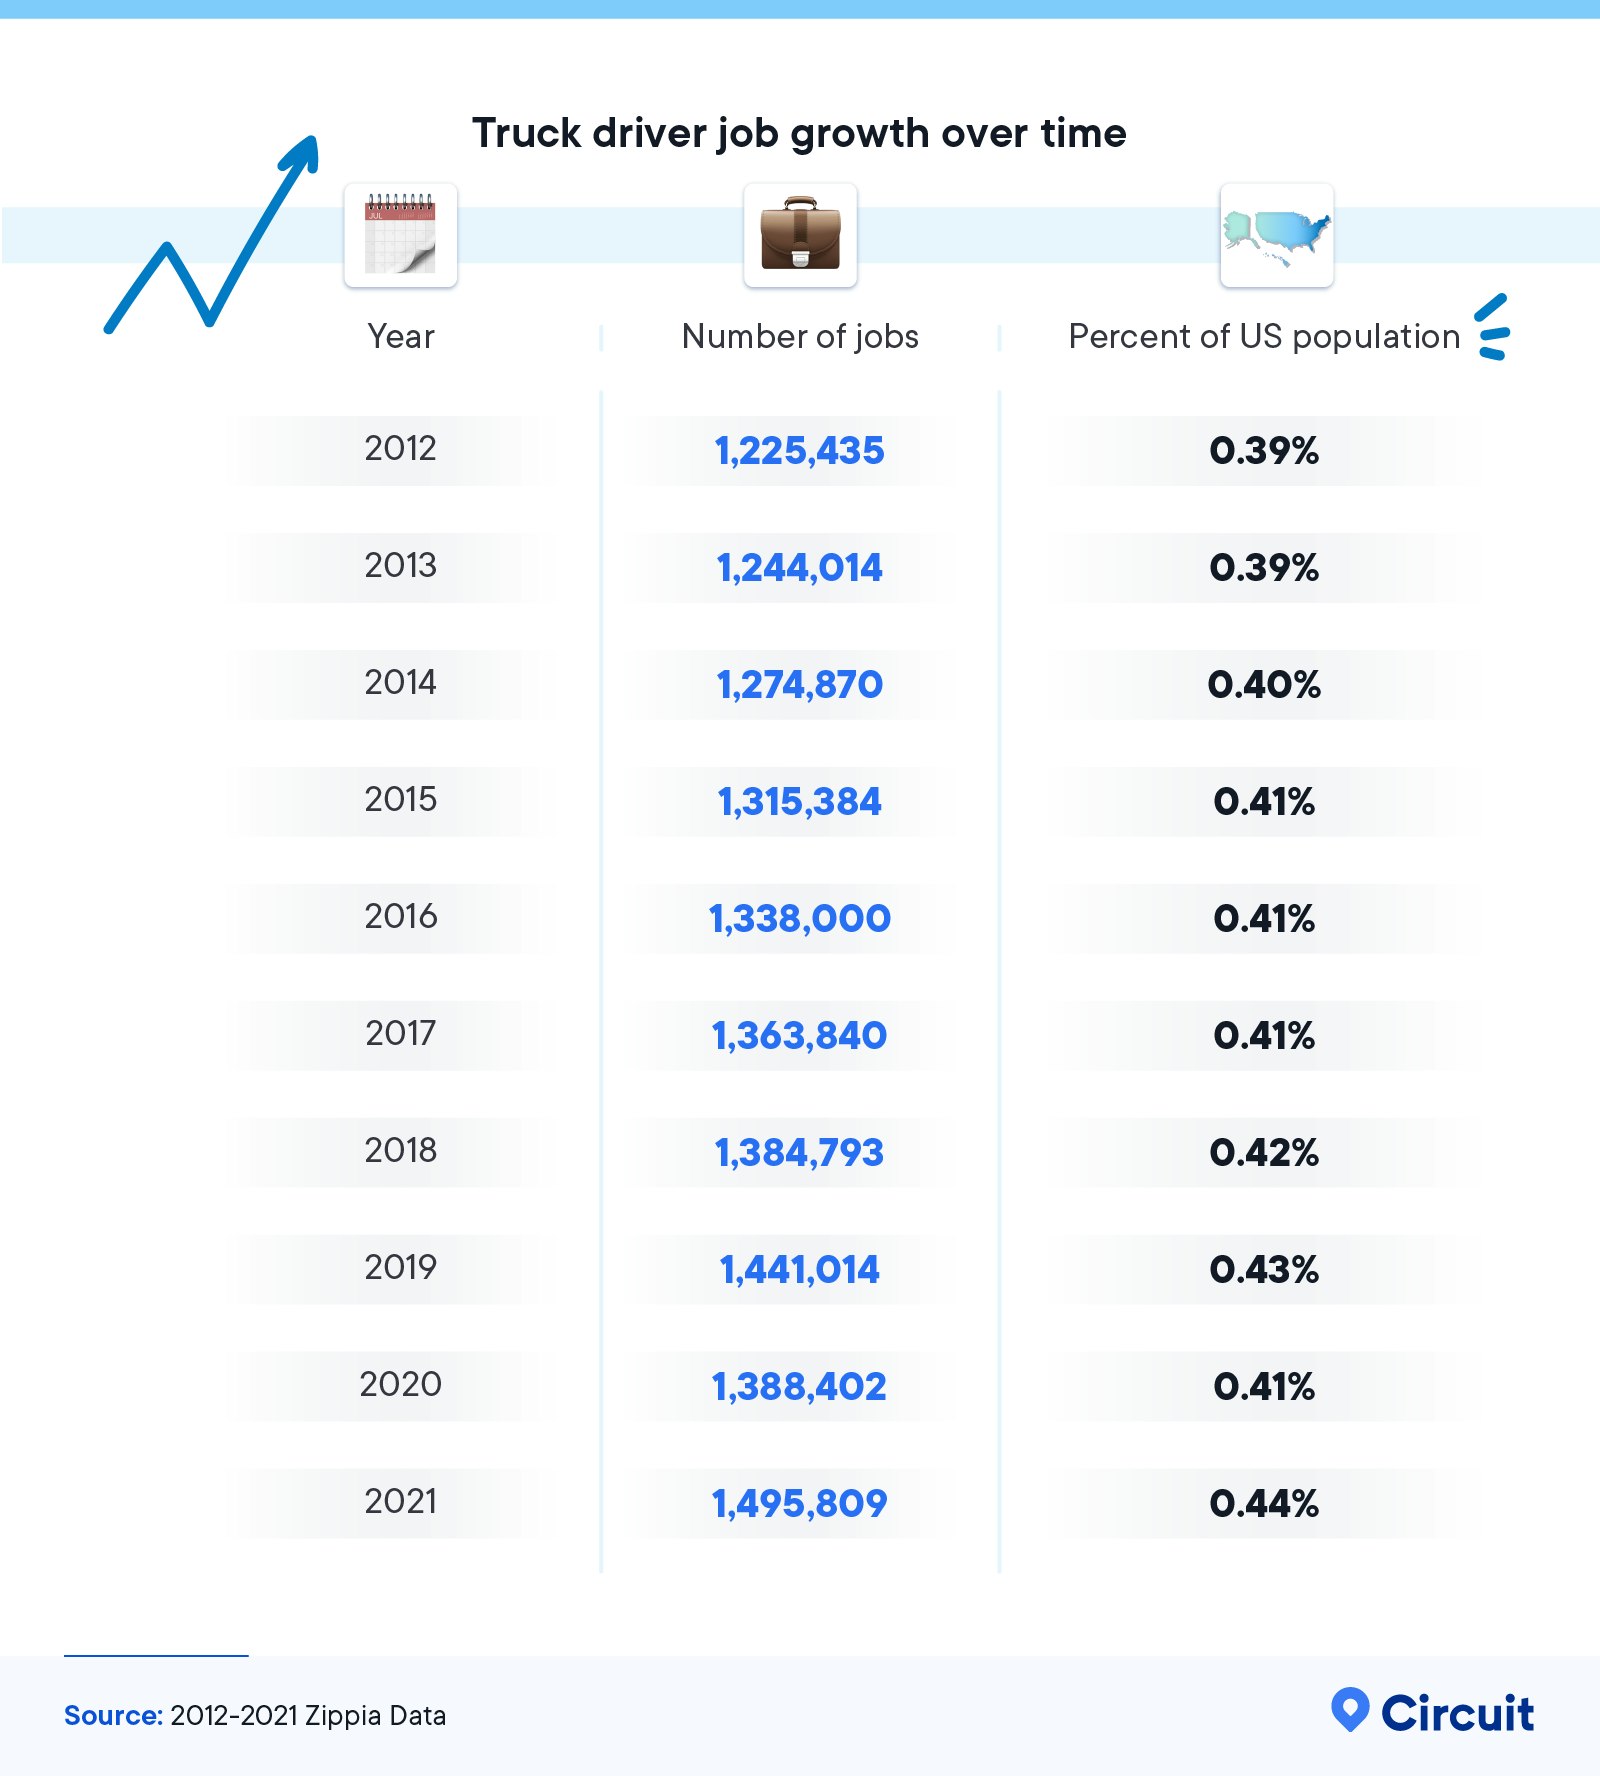 Truck driver job growth over time